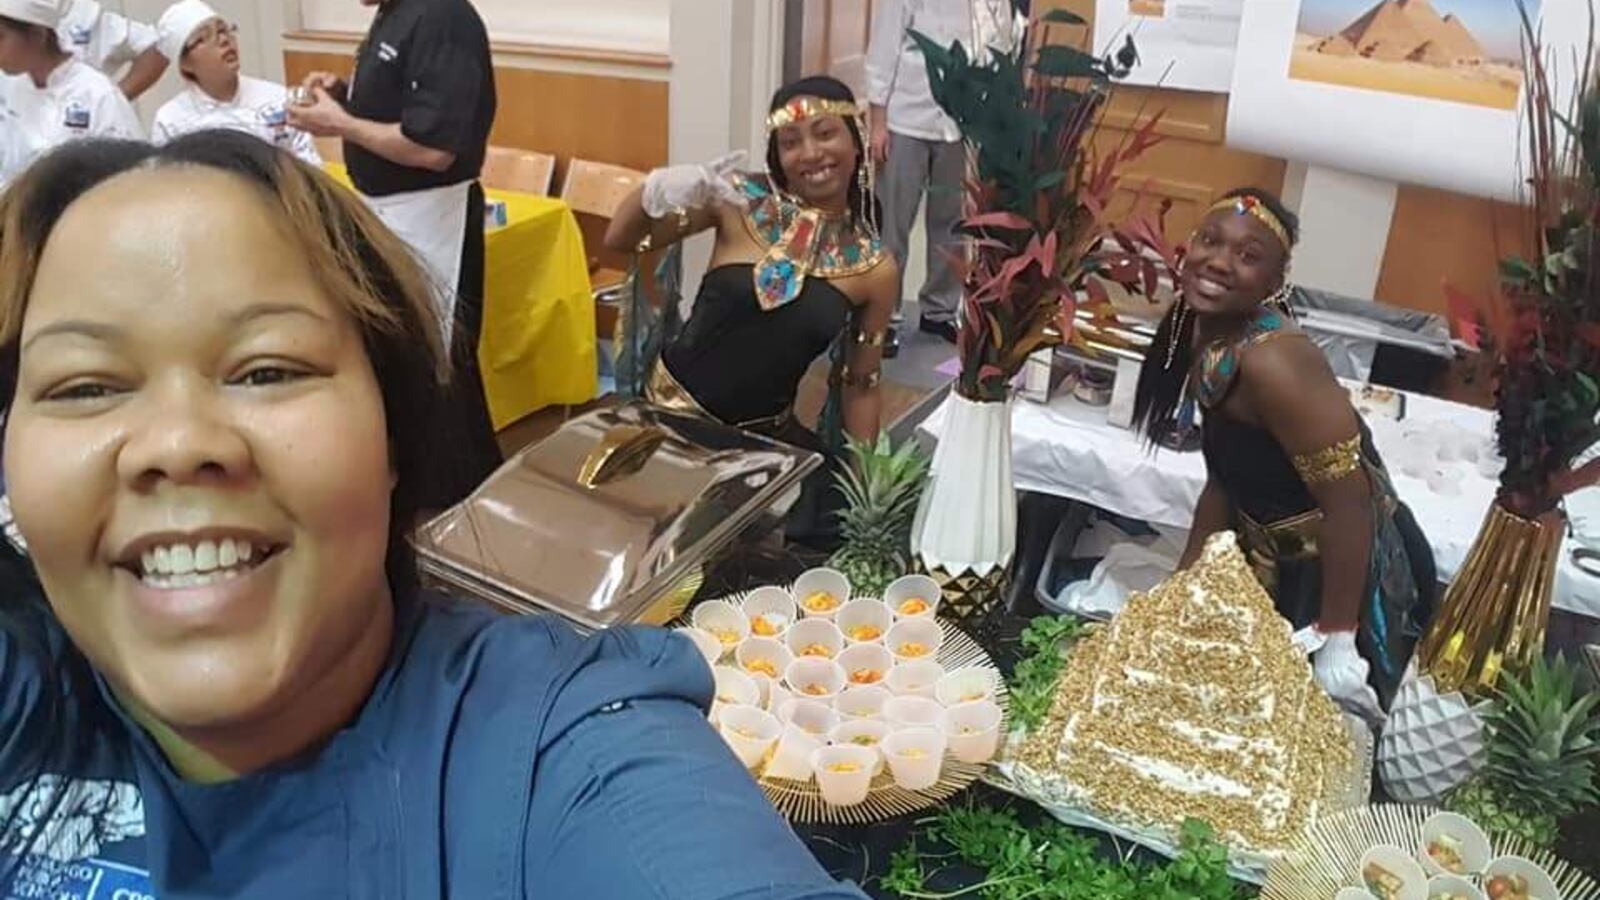 Golden Apple Award finalist Athenia Travis takes a selfie with her culinary arts students at Southside Occupational Academy. She and her students sometimes prepare meals from cultures across the world for the whole school to enjoy.